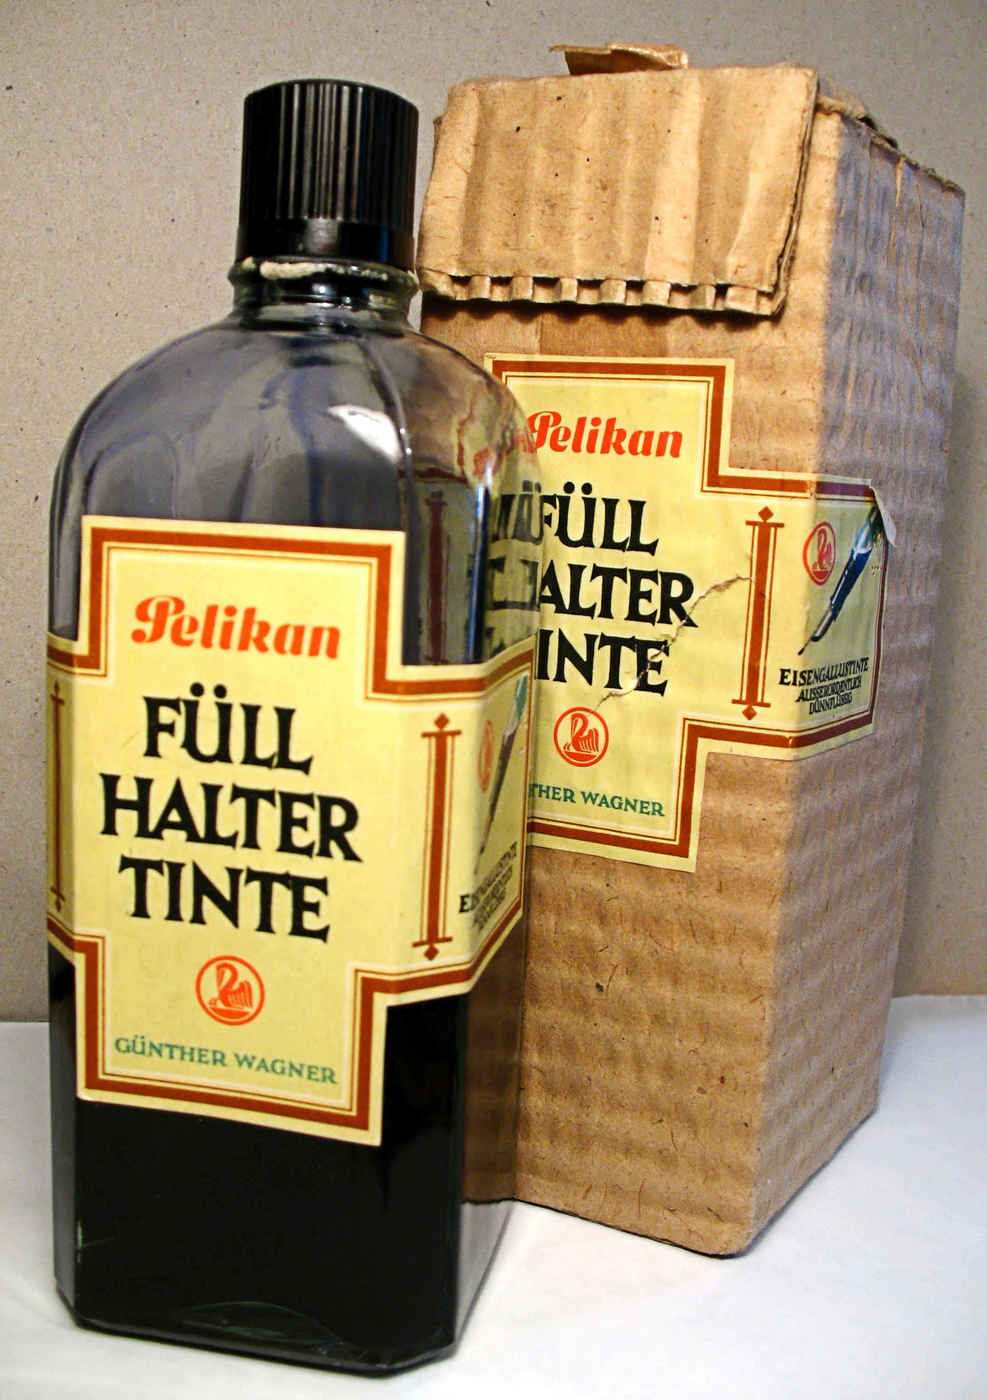 “Iron gall ink for fountain pens, refill bottle, 0.5 liter (500 ml), Pelikan, Günther Wagner, ca 1950s with storage container”; 2008 photo, Richard Huber